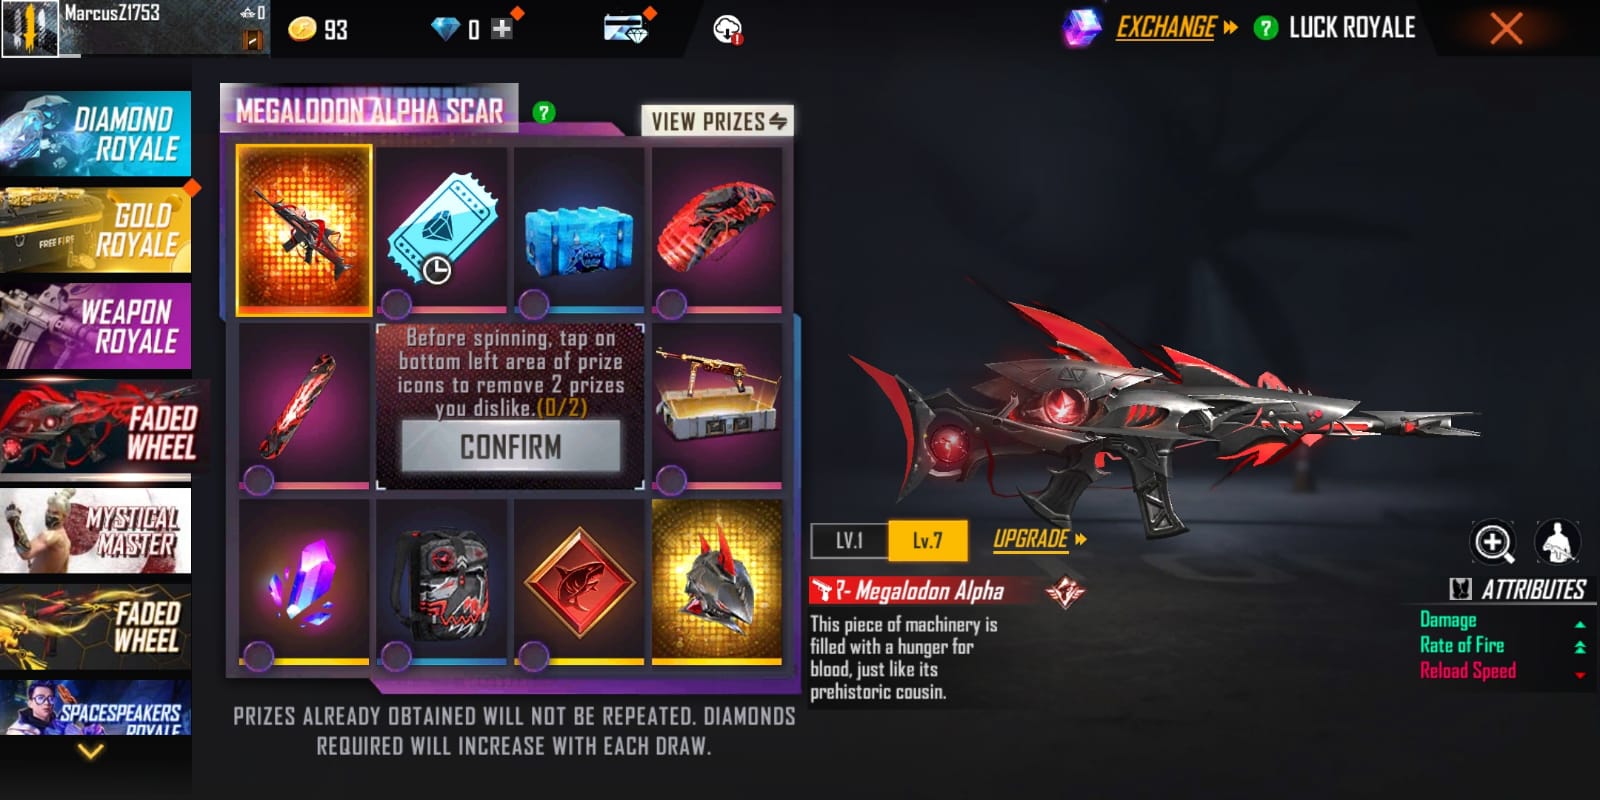 Free Fire Faded Wheel Event: Check How to get the SCAR Megalodon Alpha Evo gun, and more items from the event - All you need to know